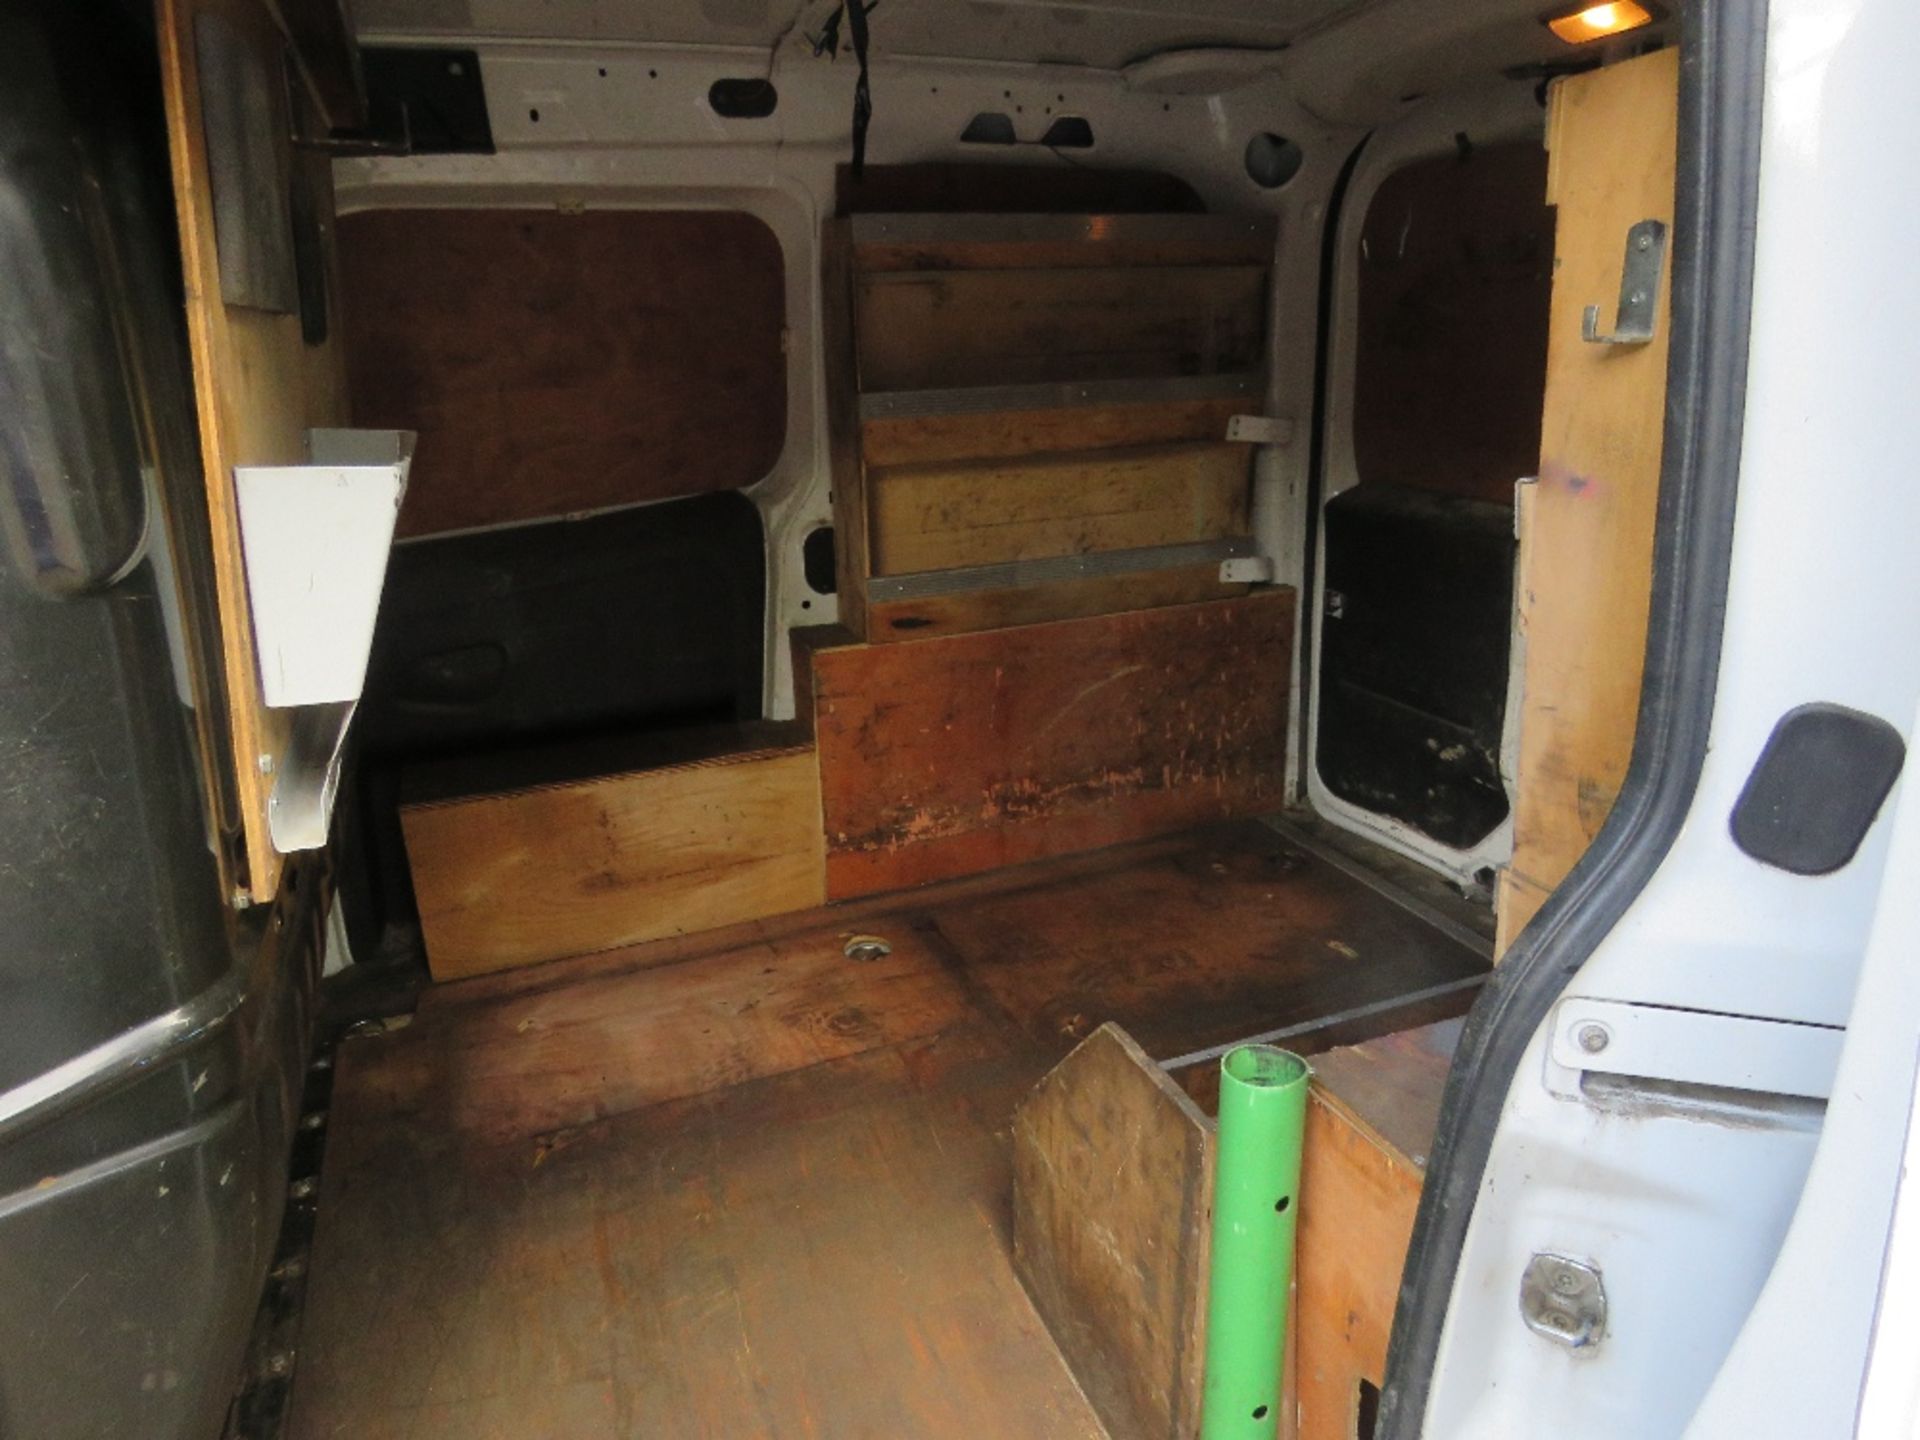 VAUXHALL COMBI PANEL VAN REG: FP64 HTD WITH V5, TESTED UNTIL 30TH OCTOBER 2022. ONE OWNER, OWNED FRO - Image 8 of 11